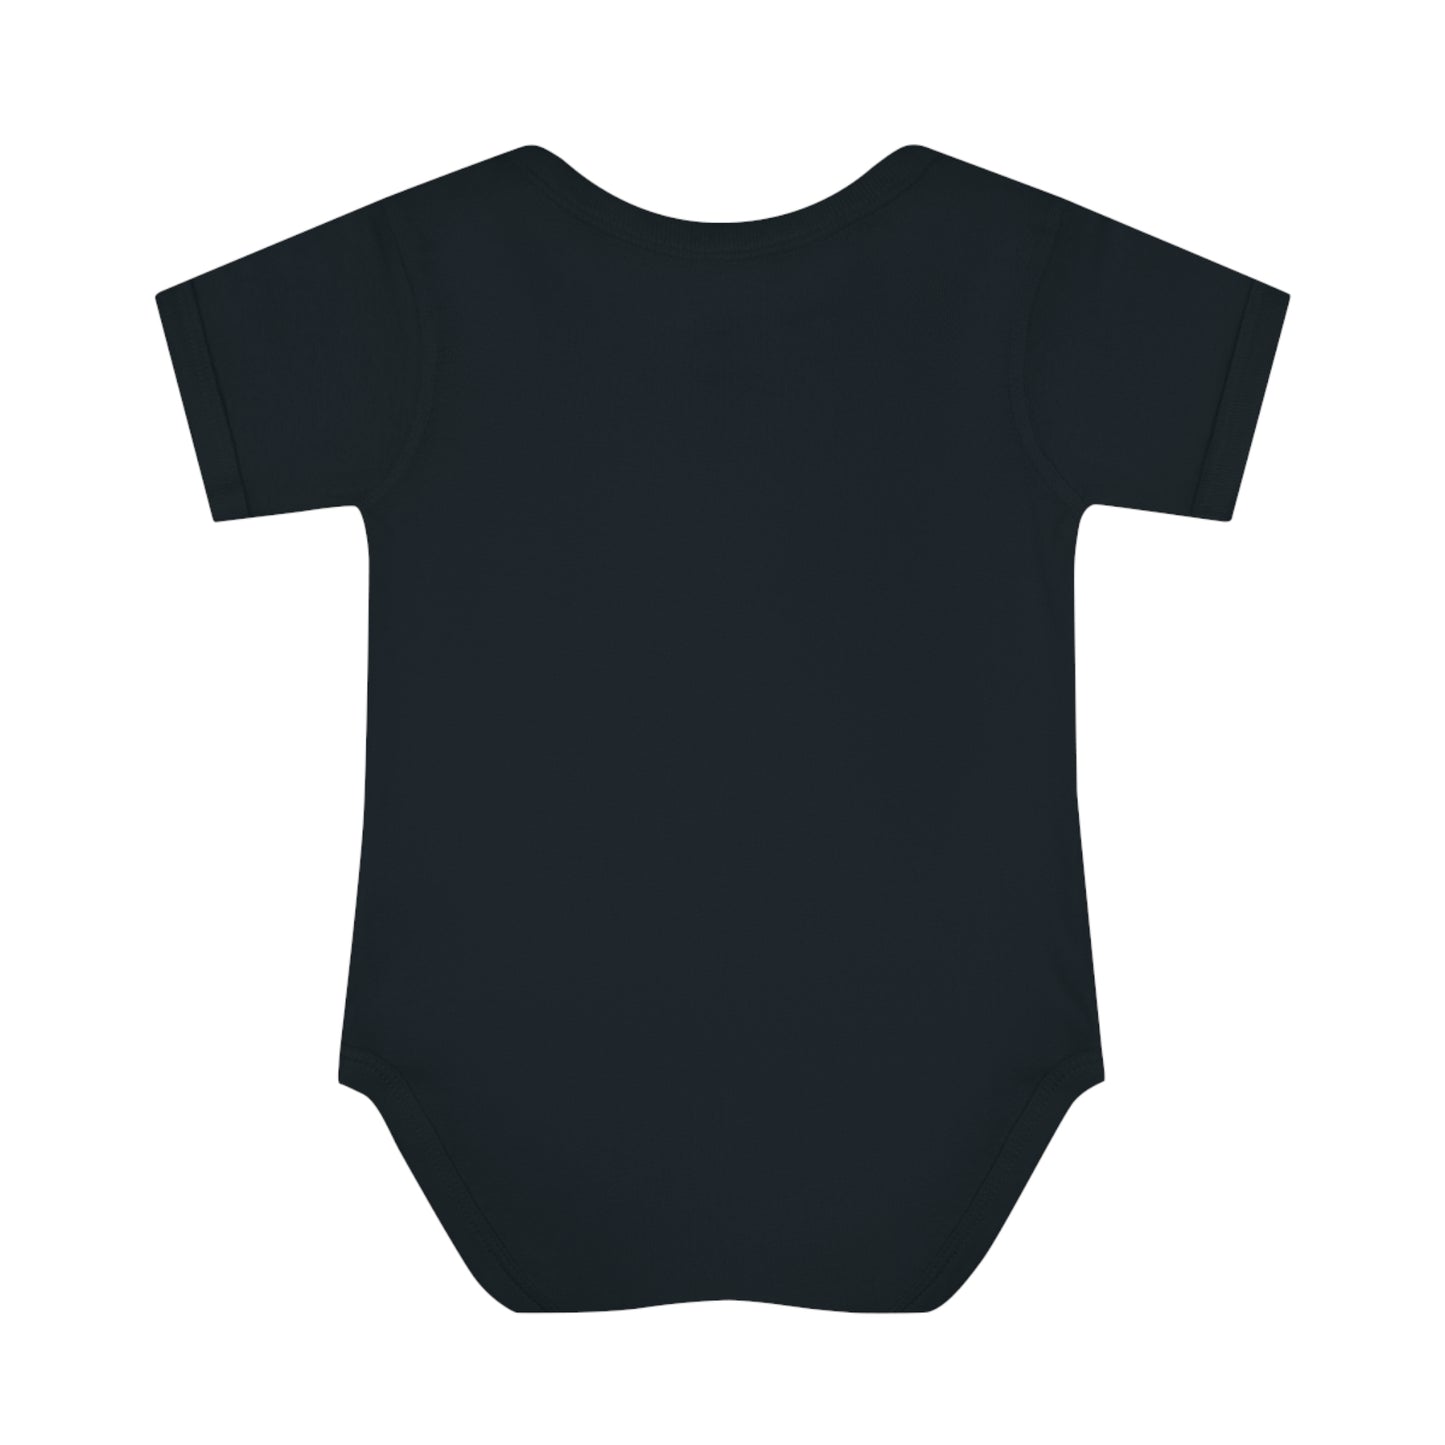 what is a good product name for a baby suit that features a design by Chalermchai Kositpipat

Chalermchai's Baby Suit Design.